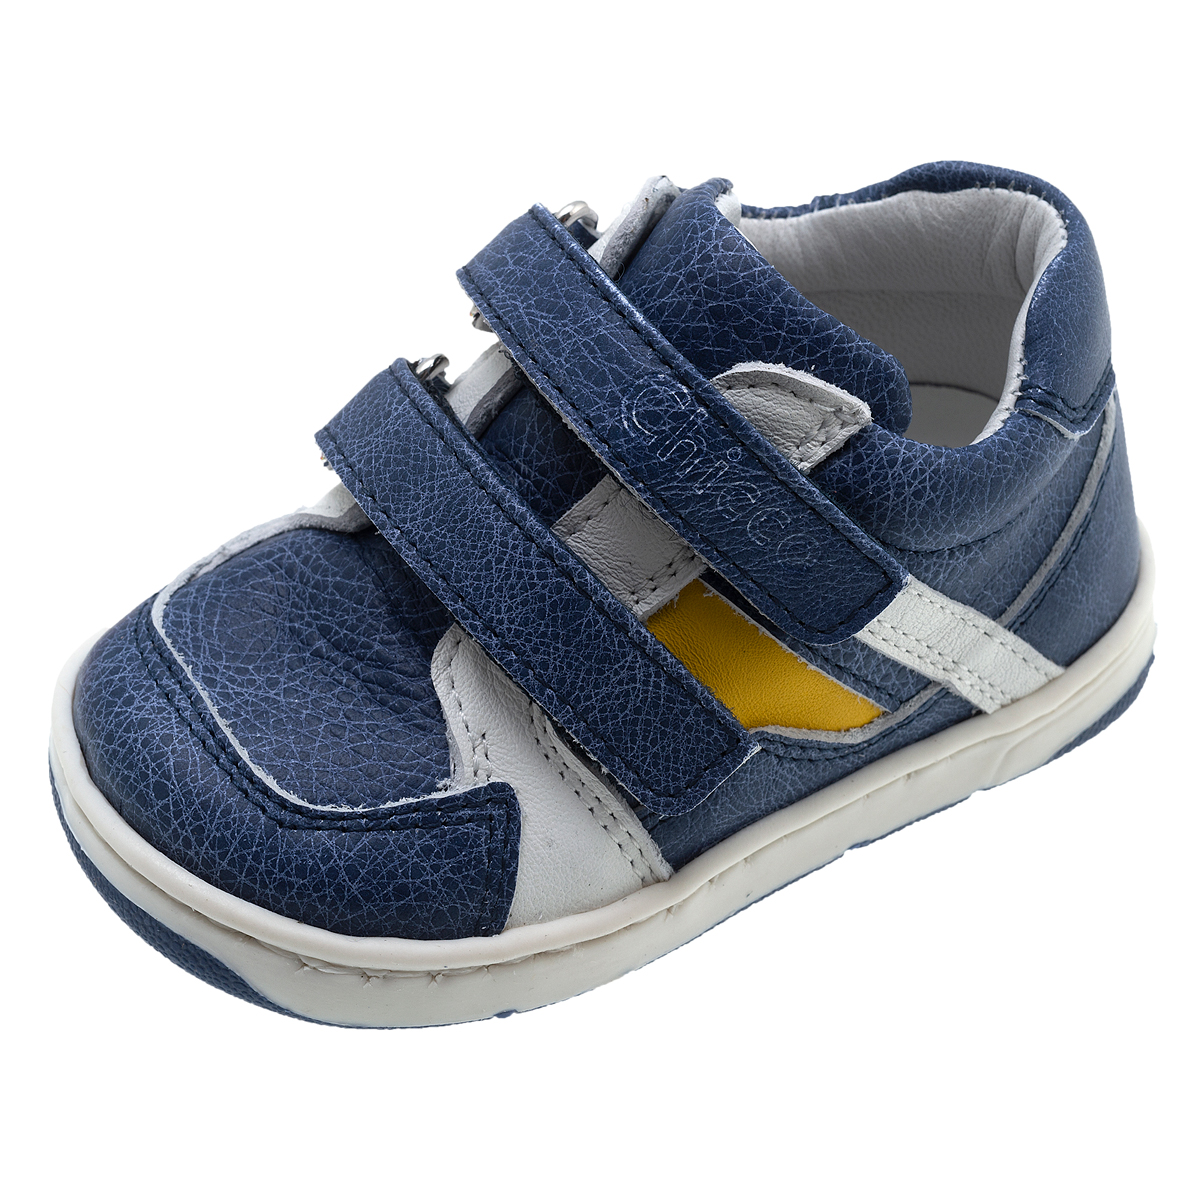 Adidasi copii Chicco Gelso, bleumarin, 63456 CHICCO